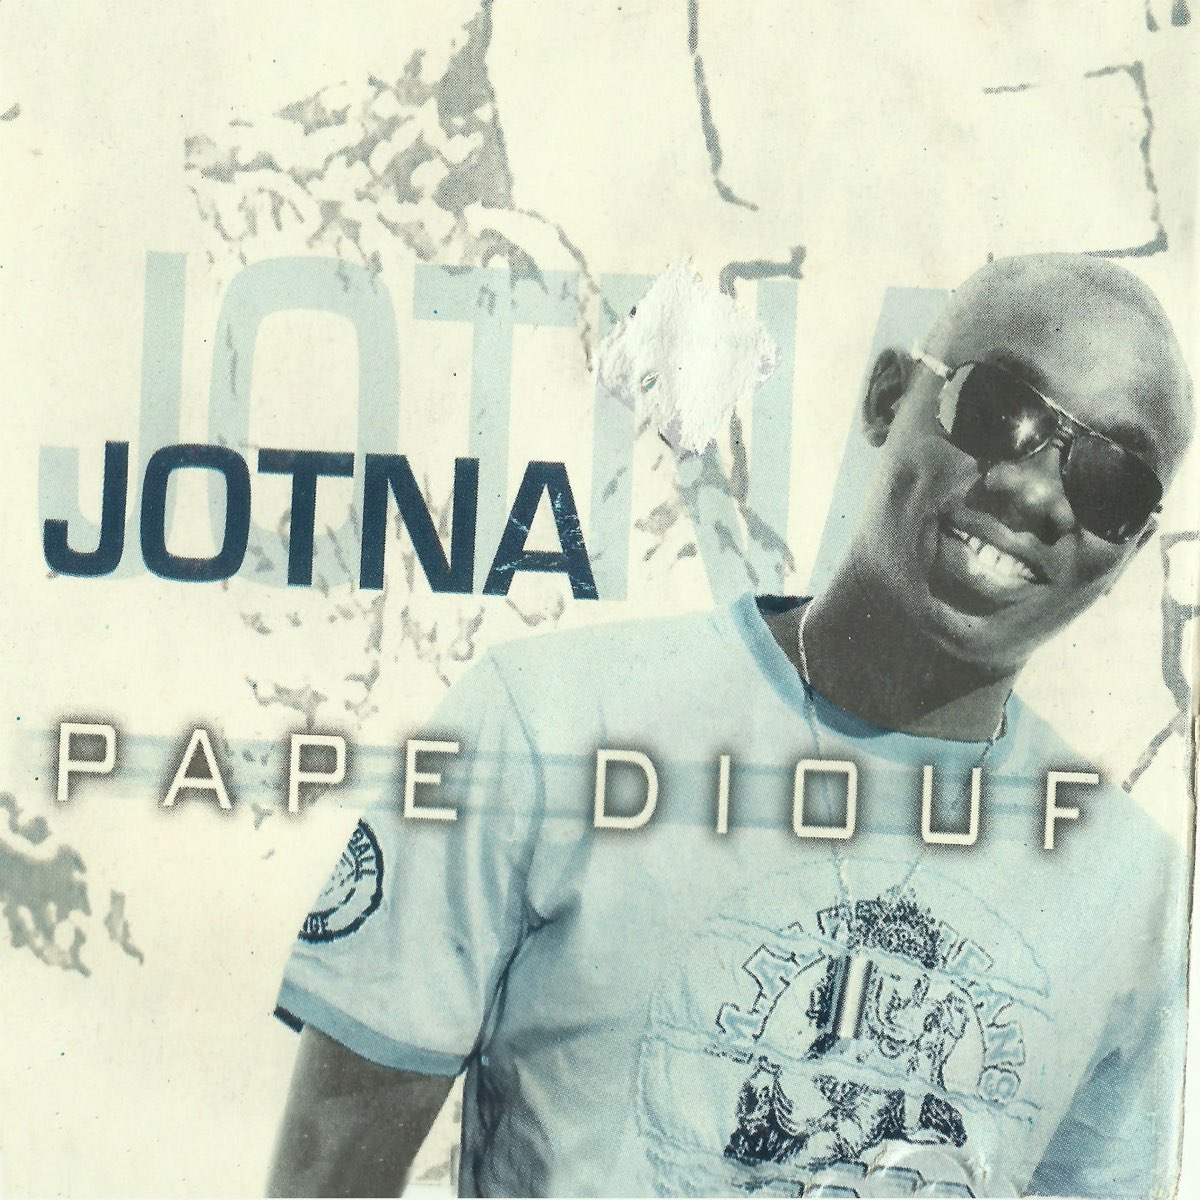 7 seconds pape diouf. 7 Seconds feat. Coco Pape Diouf. Joezi feat. Coco Pape Diouf 7 seconds.